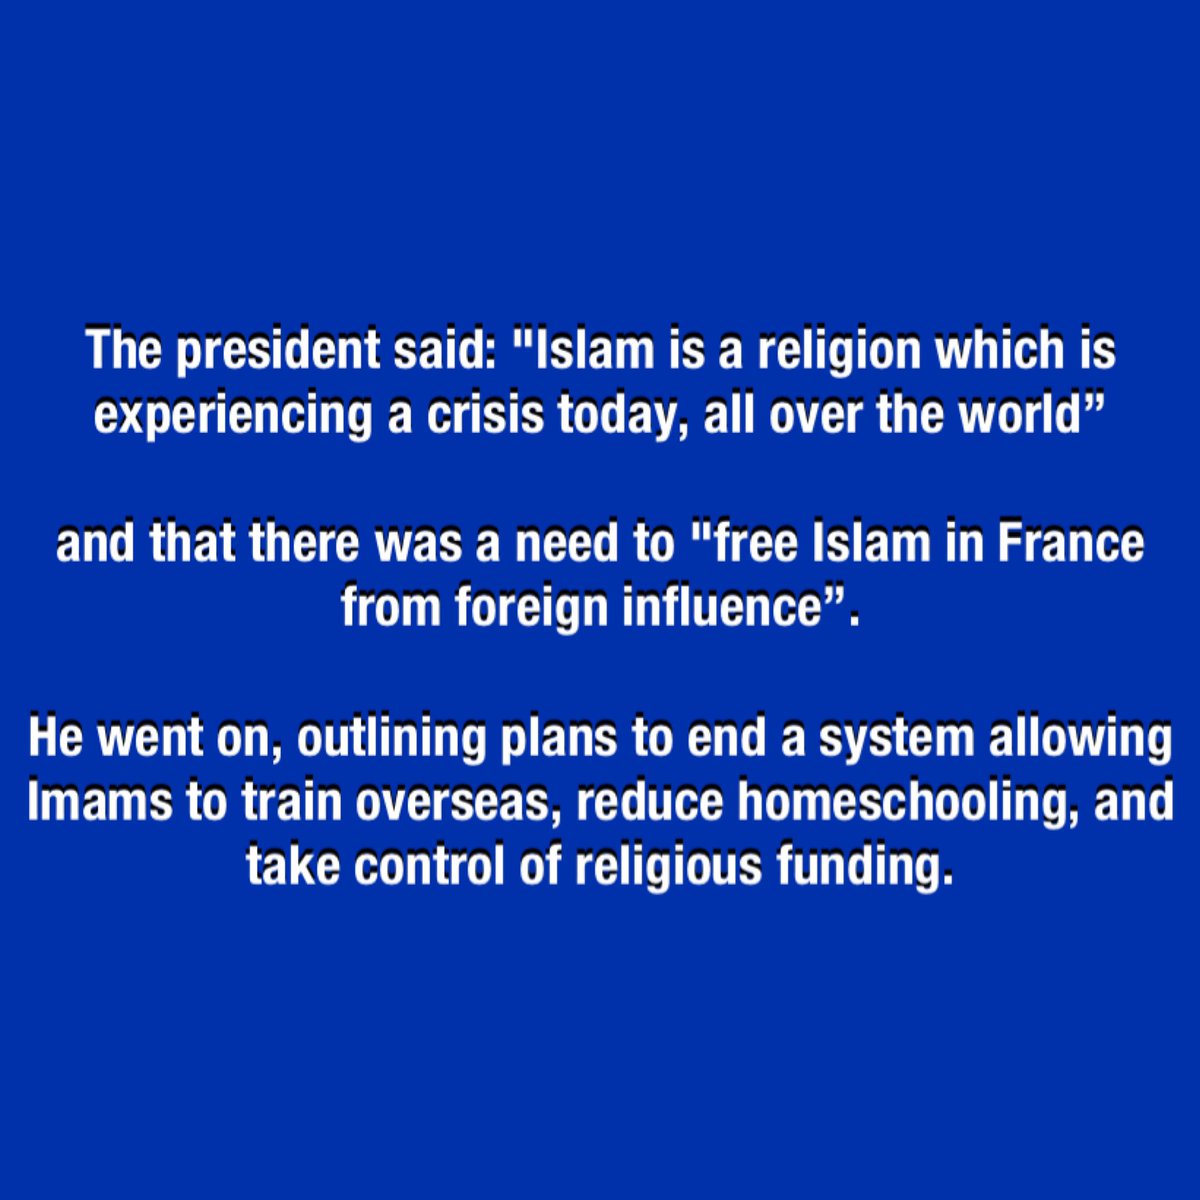 Why there’s tension between France & Muslims right now (pt 1):